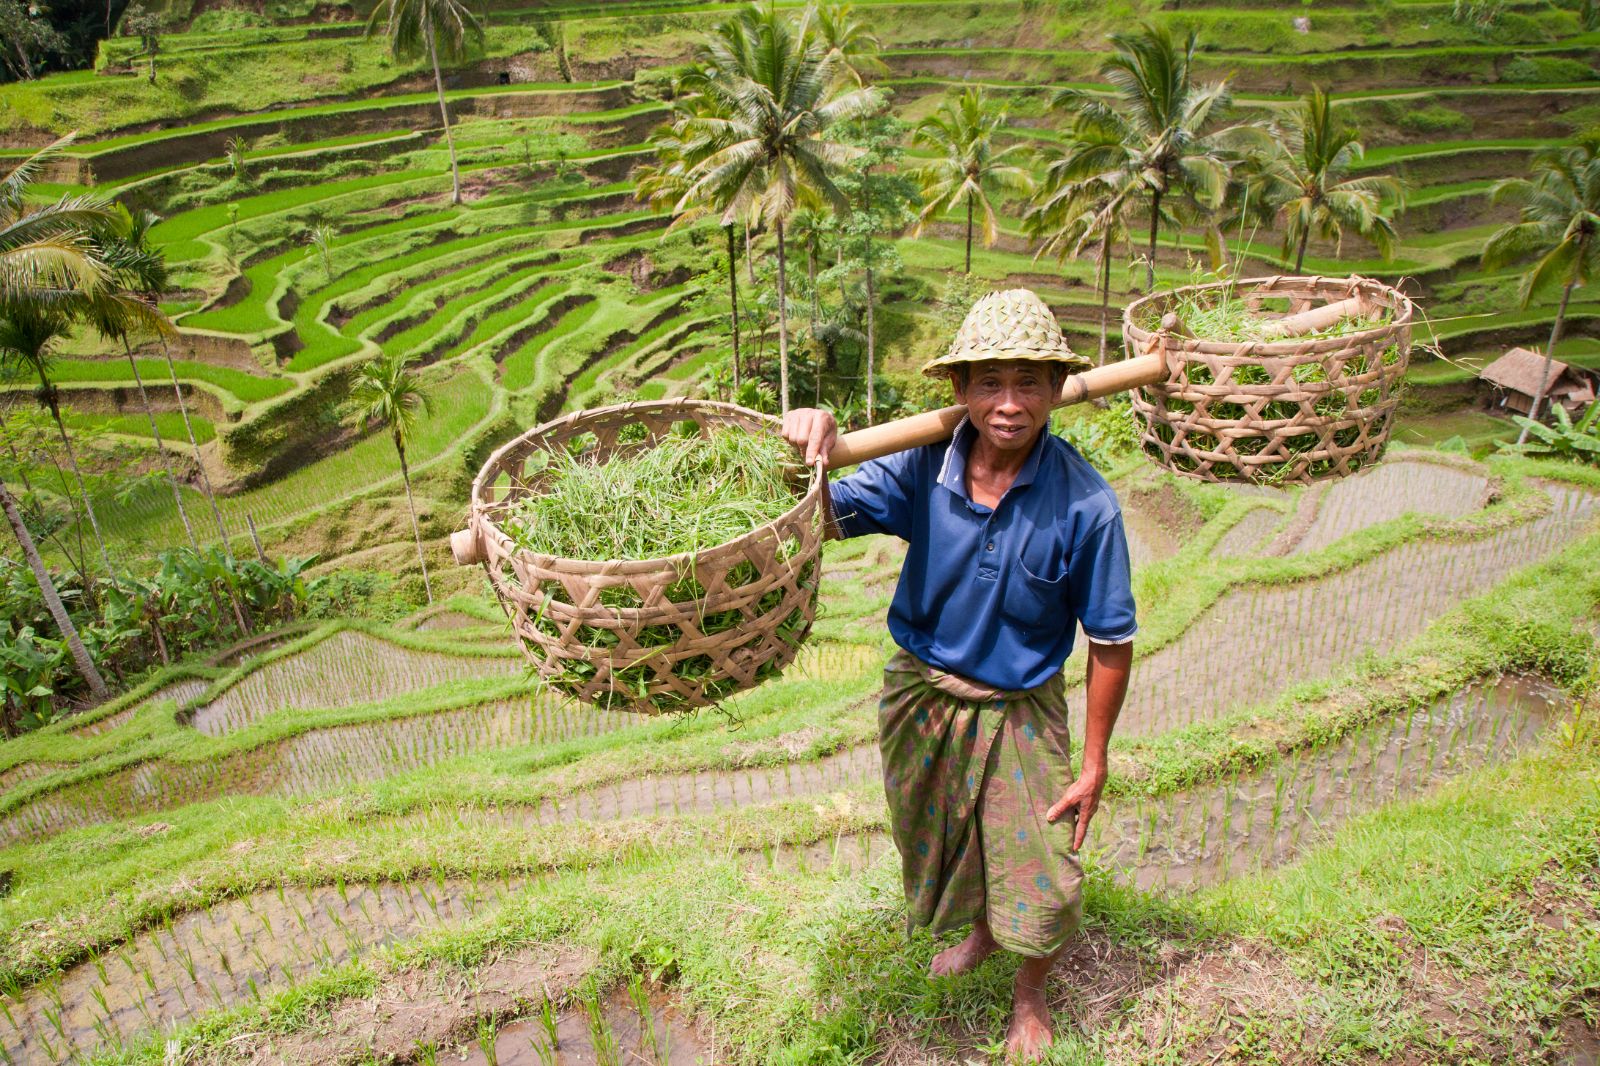 A ricer farmer in Indonesia